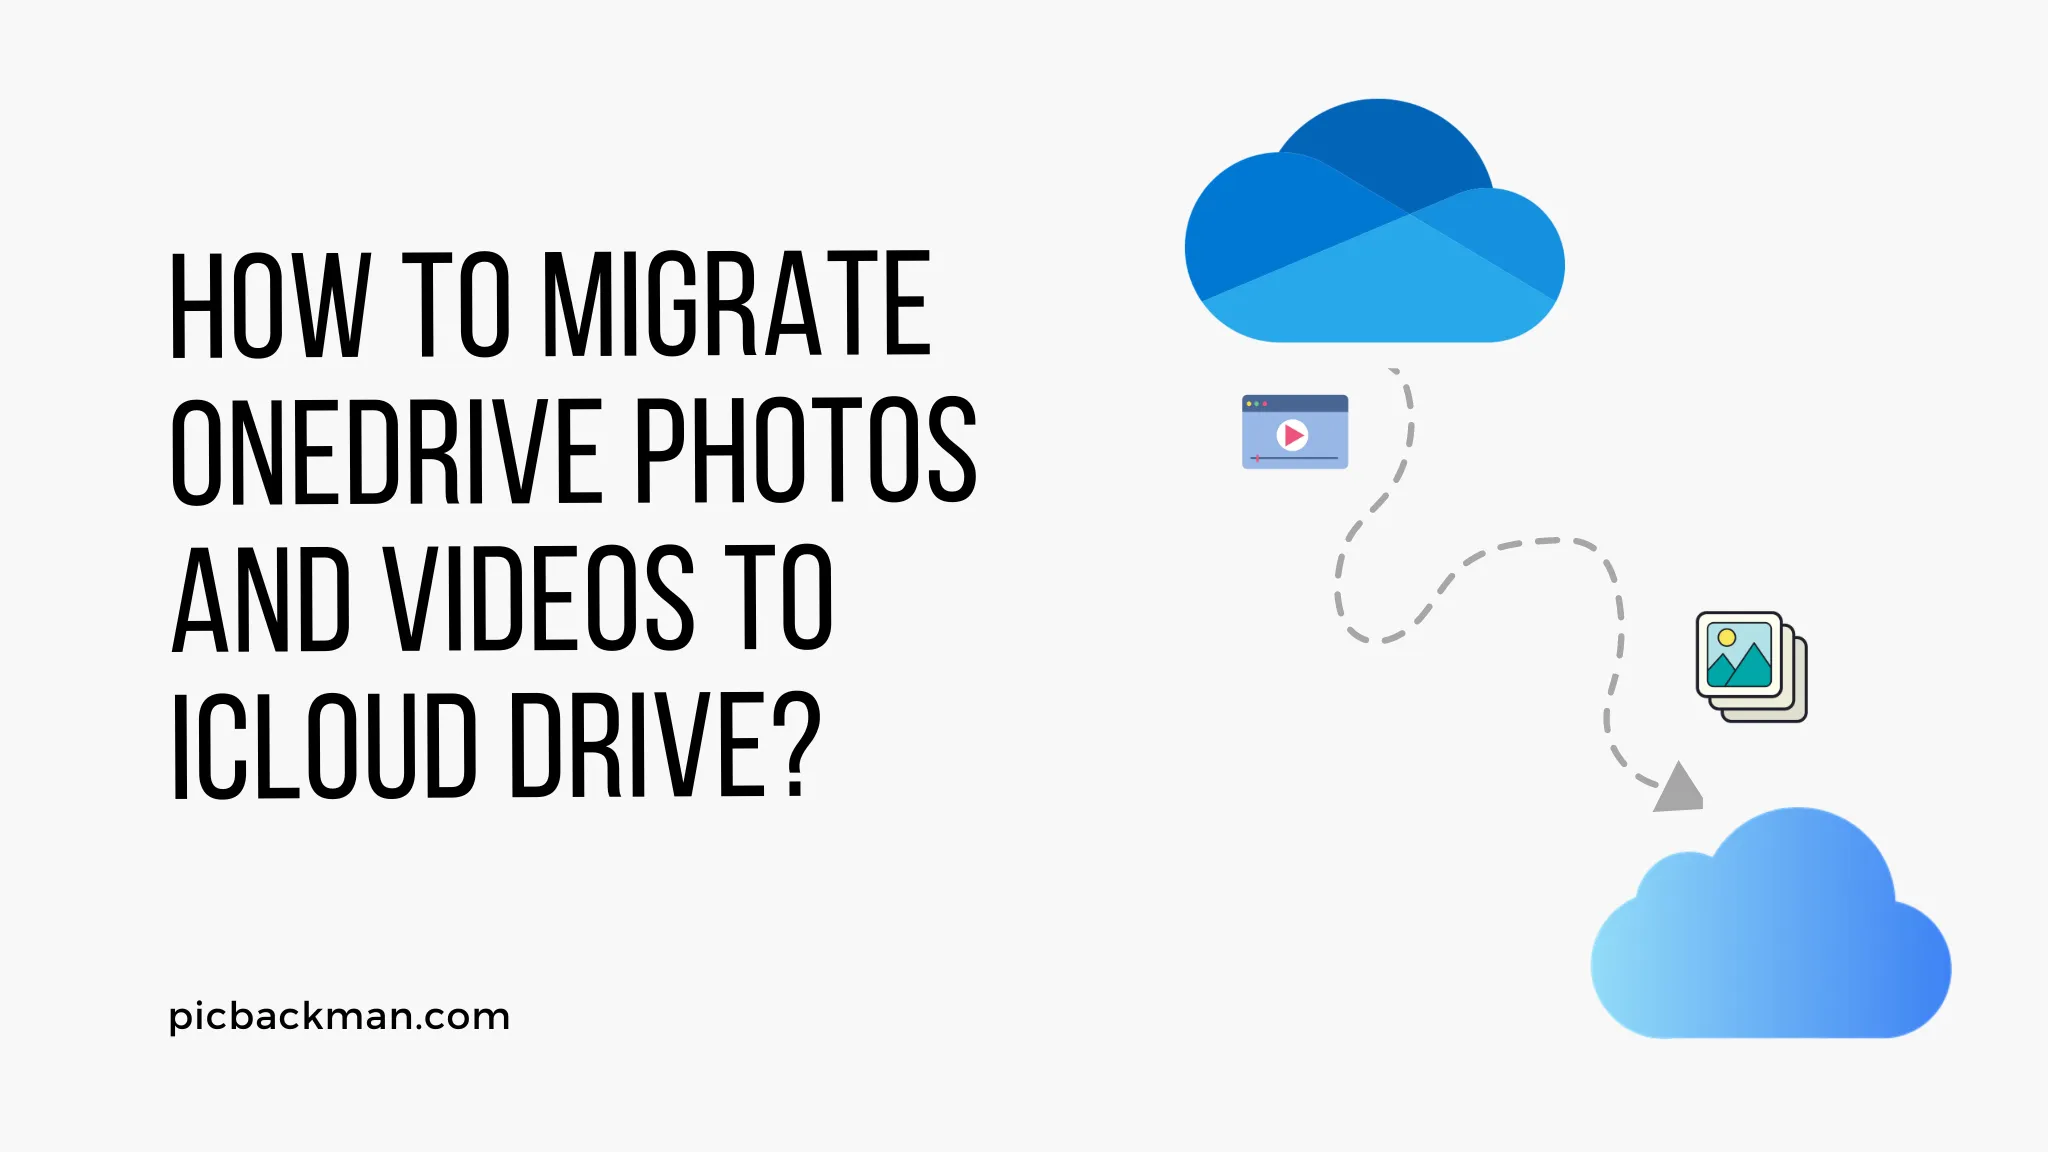 How to Migrate OneDrive Photos and Videos to iCloud Drive